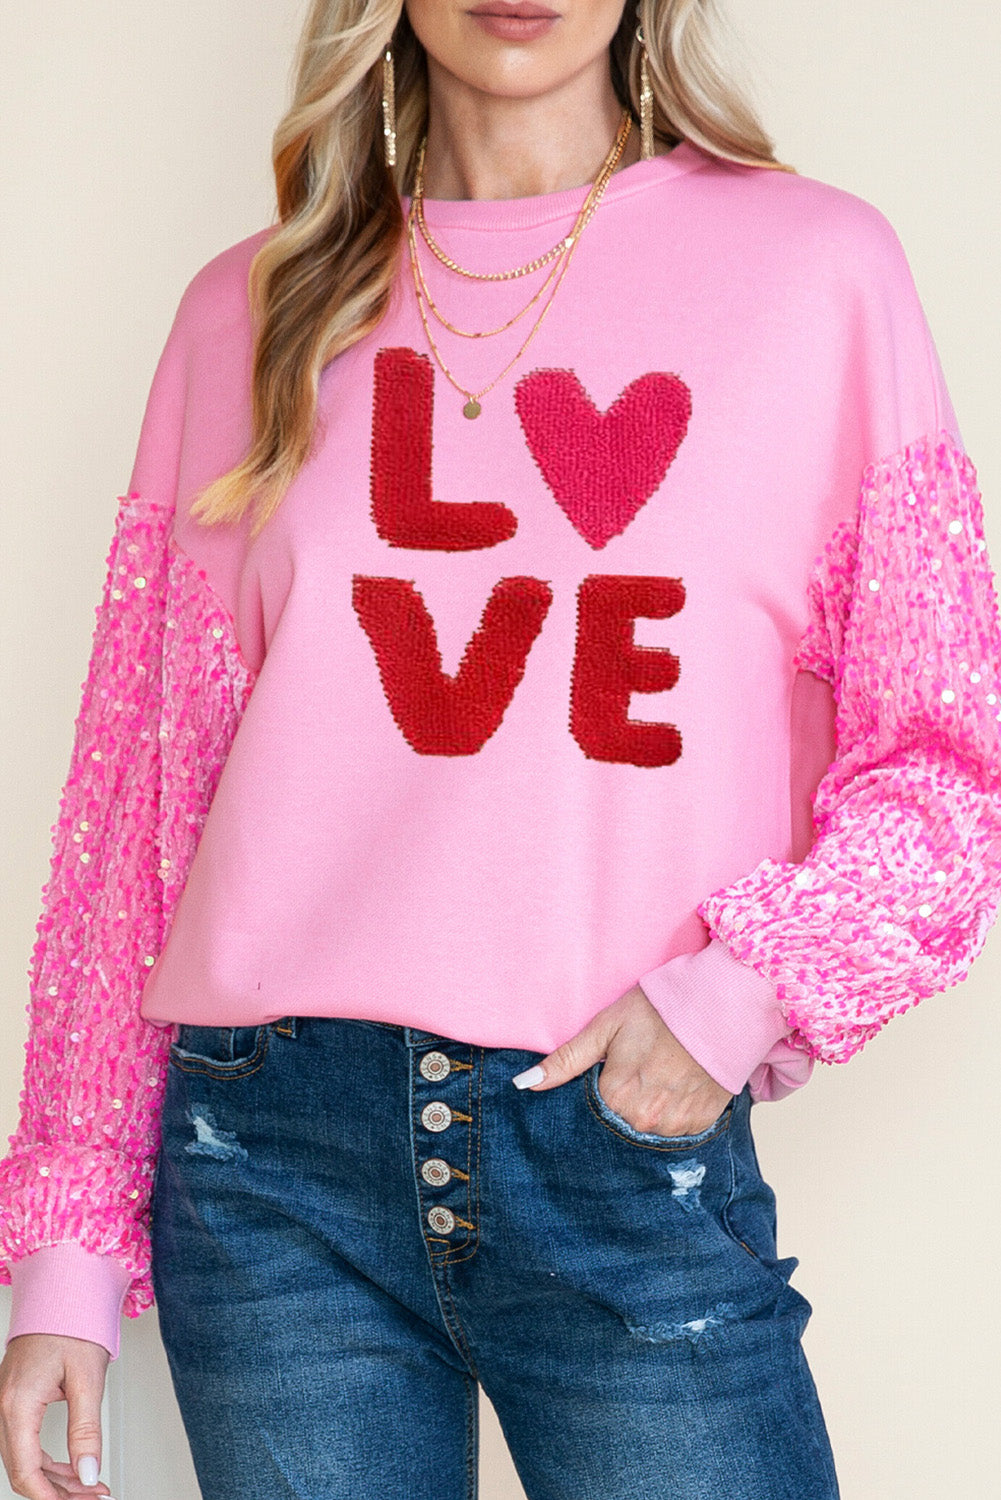 LC25126468-P10-S, LC25126468-P10-M, LC25126468-P10-L, LC25126468-P10-XL, Pink Valentines LOVE Chenille Embroidered Sequin Sleeve Top